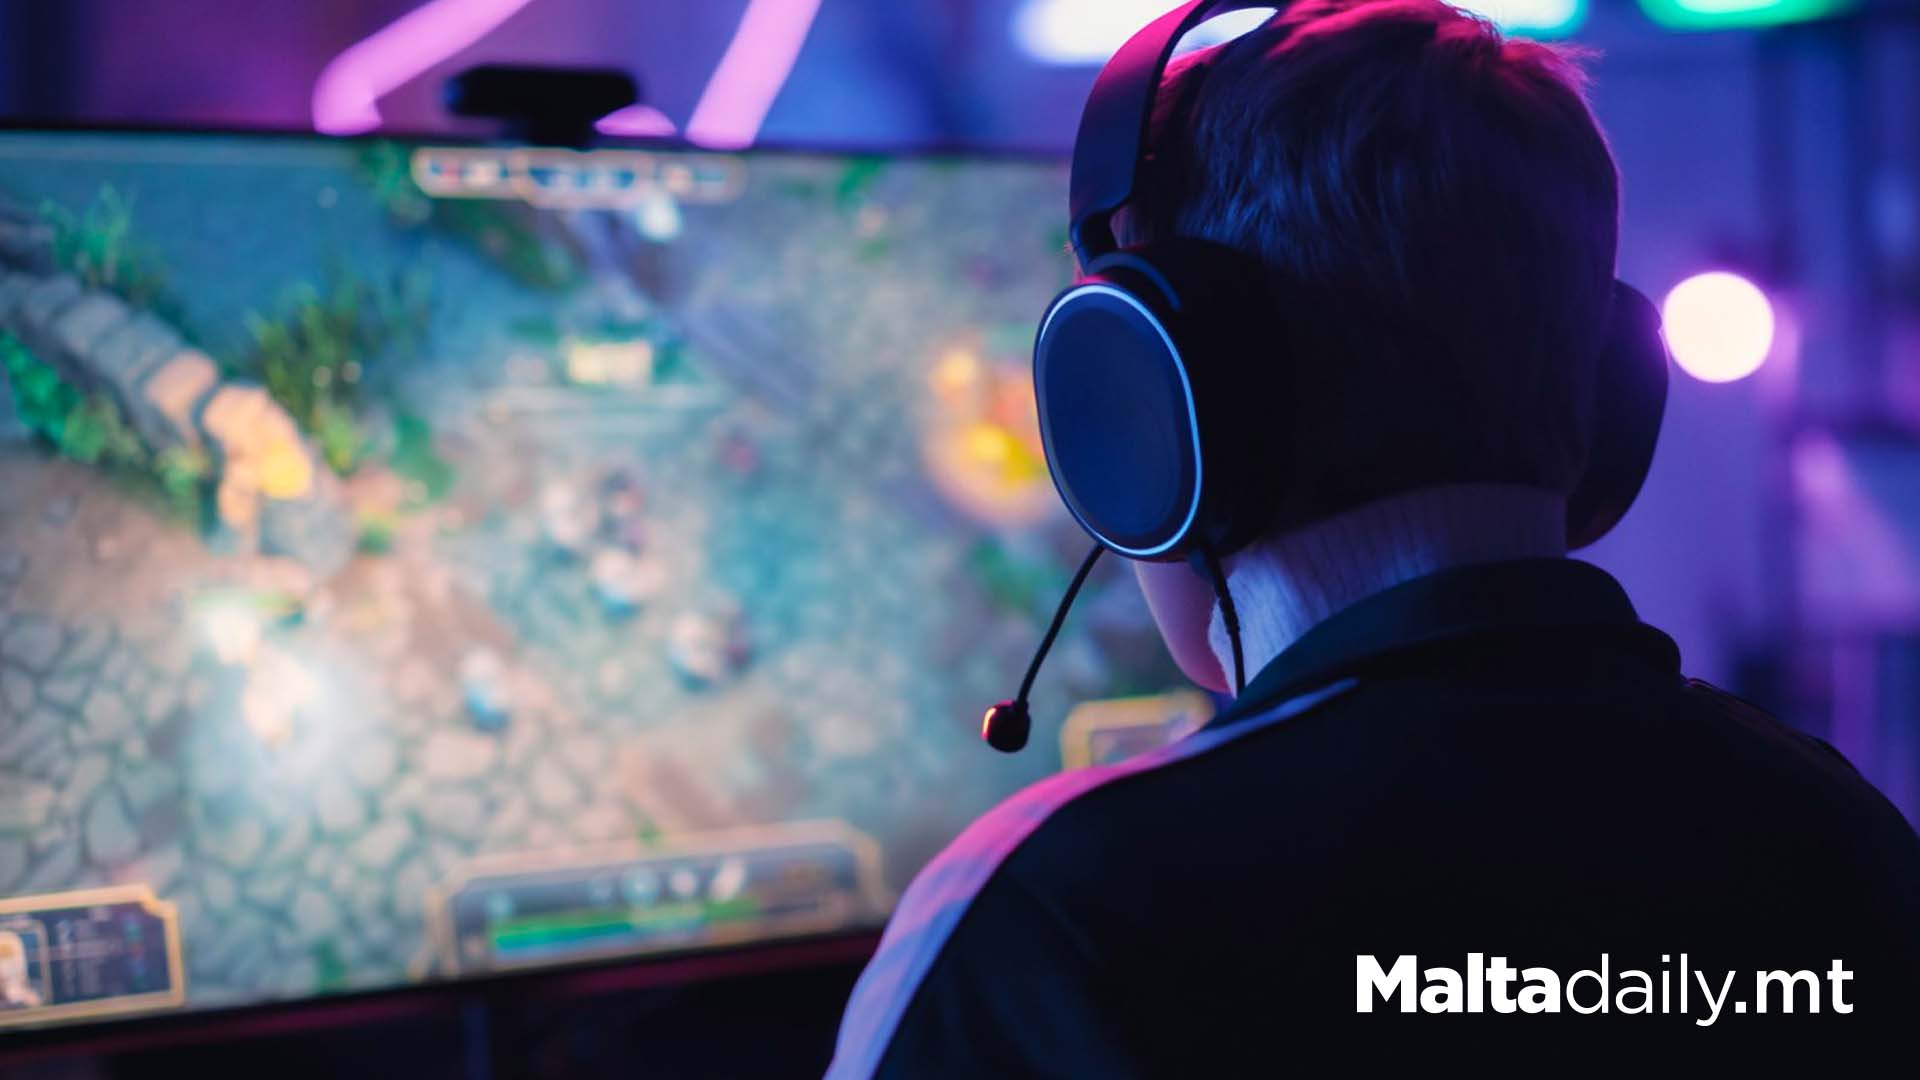 Study Finds High Hearing Damage Risk For Gamers